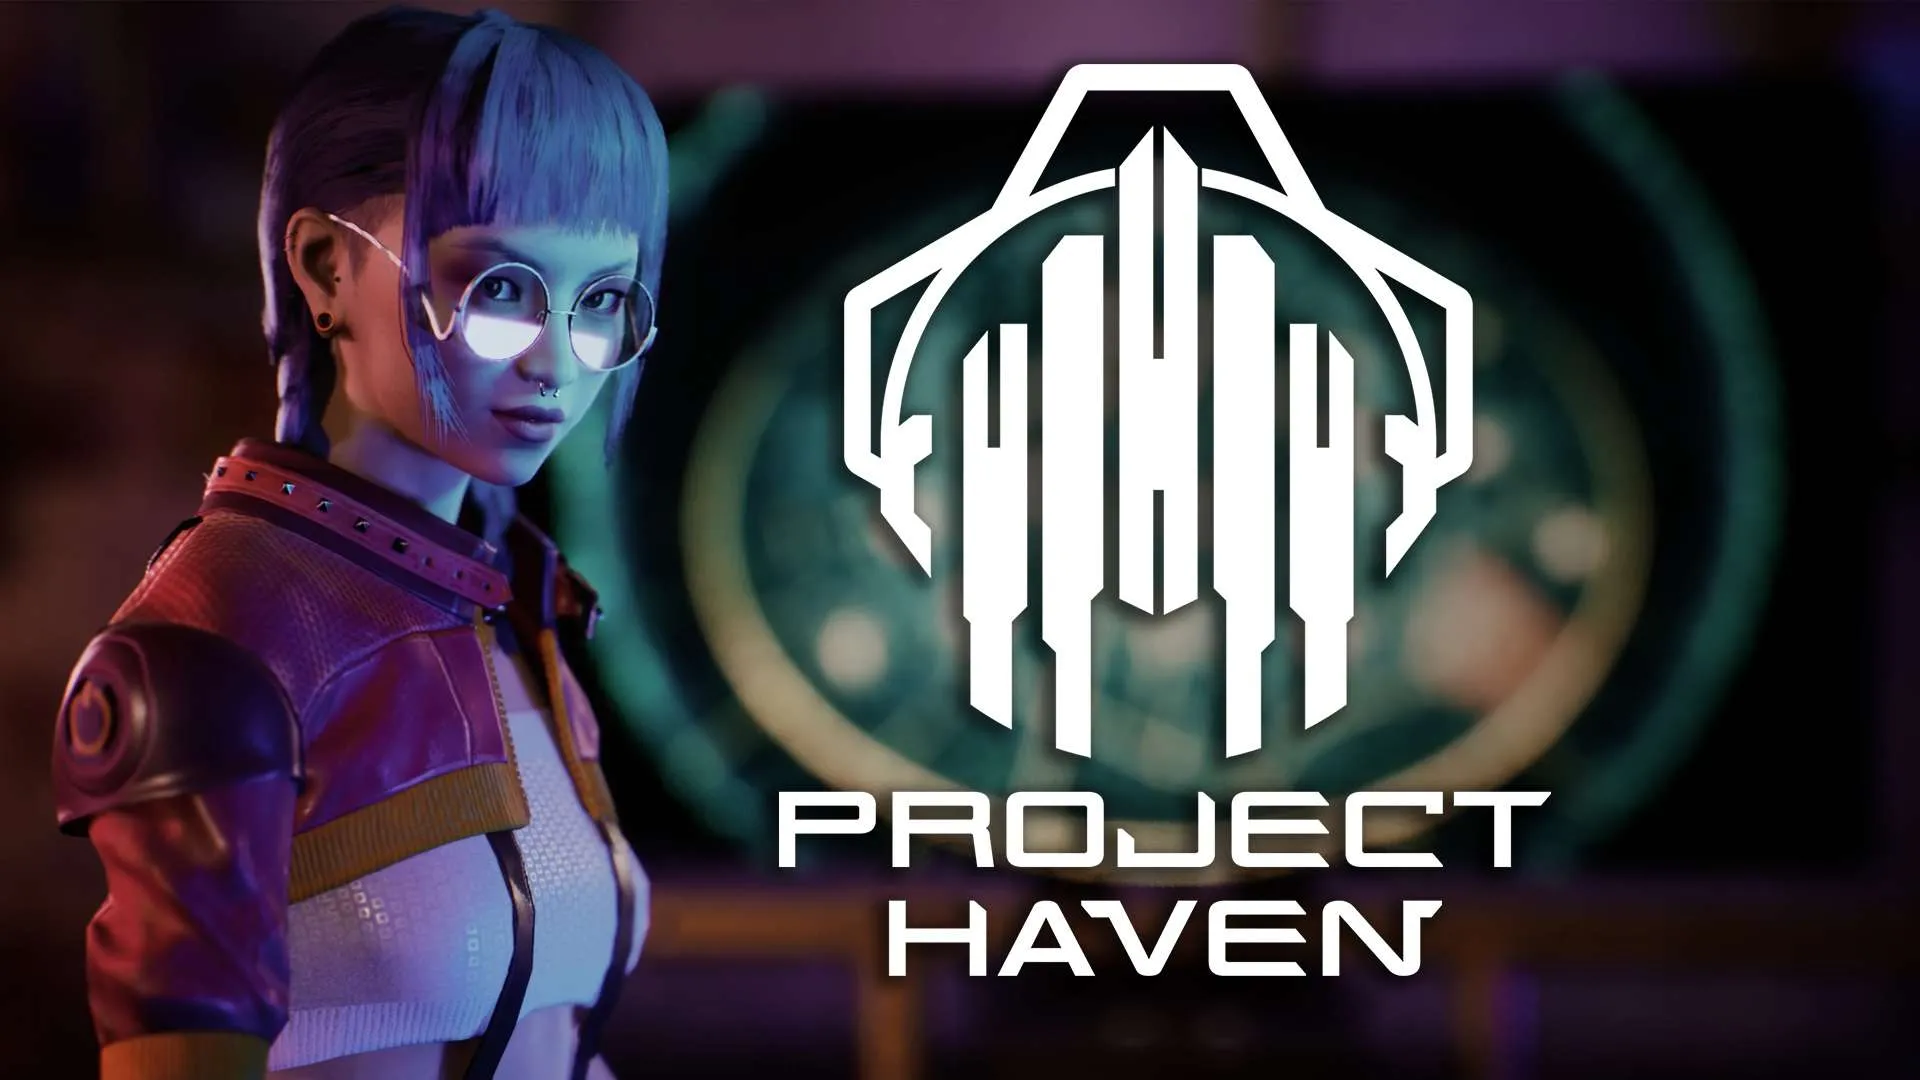 Project haven gameplay trailer